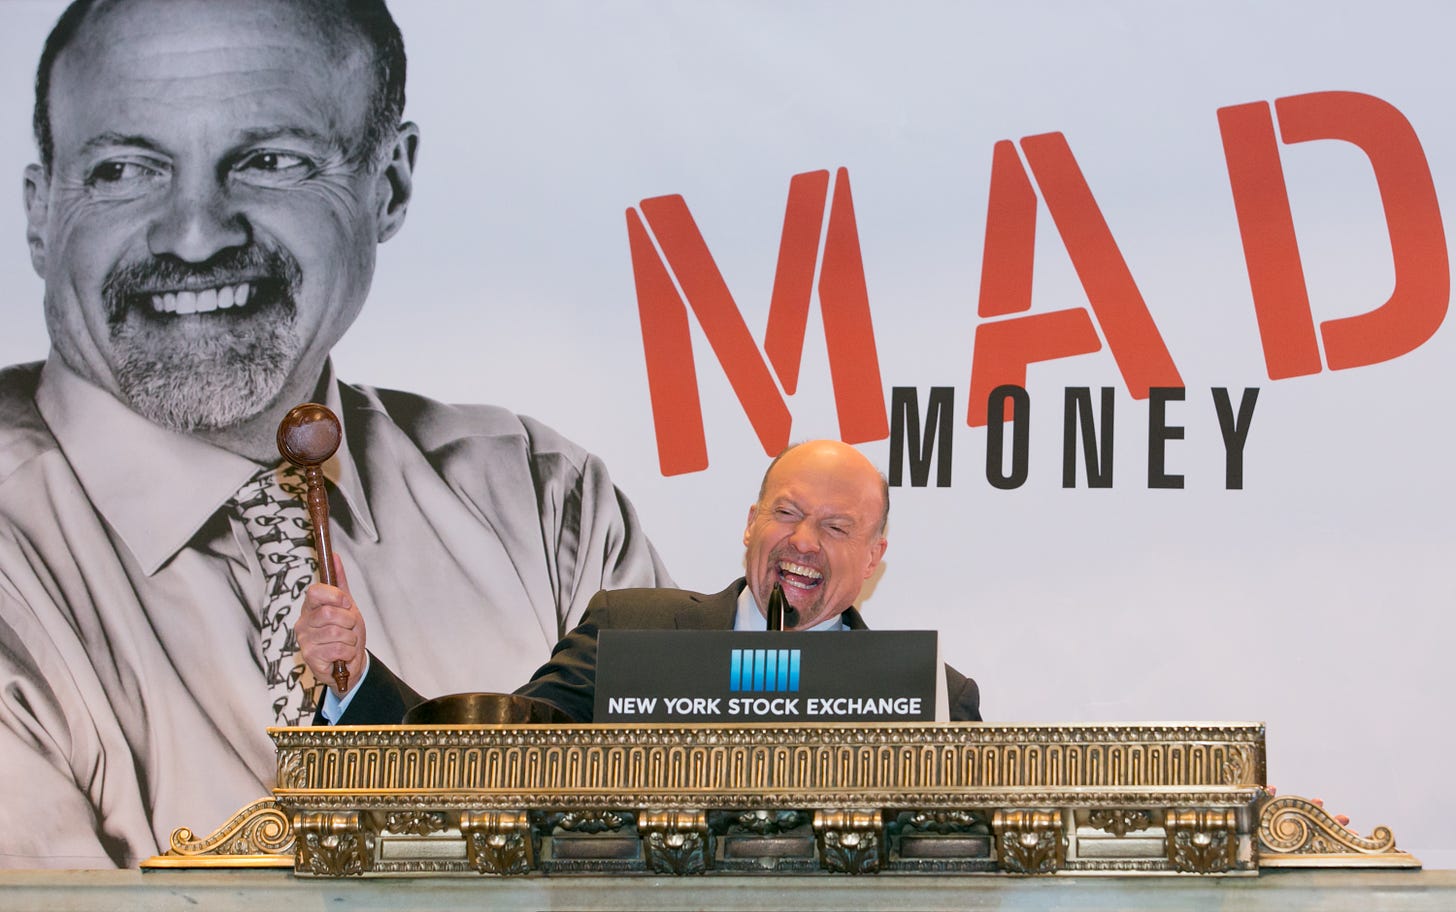 Former hedge fund manager and CNBC personality Jim Cramer. (Getty Images.)